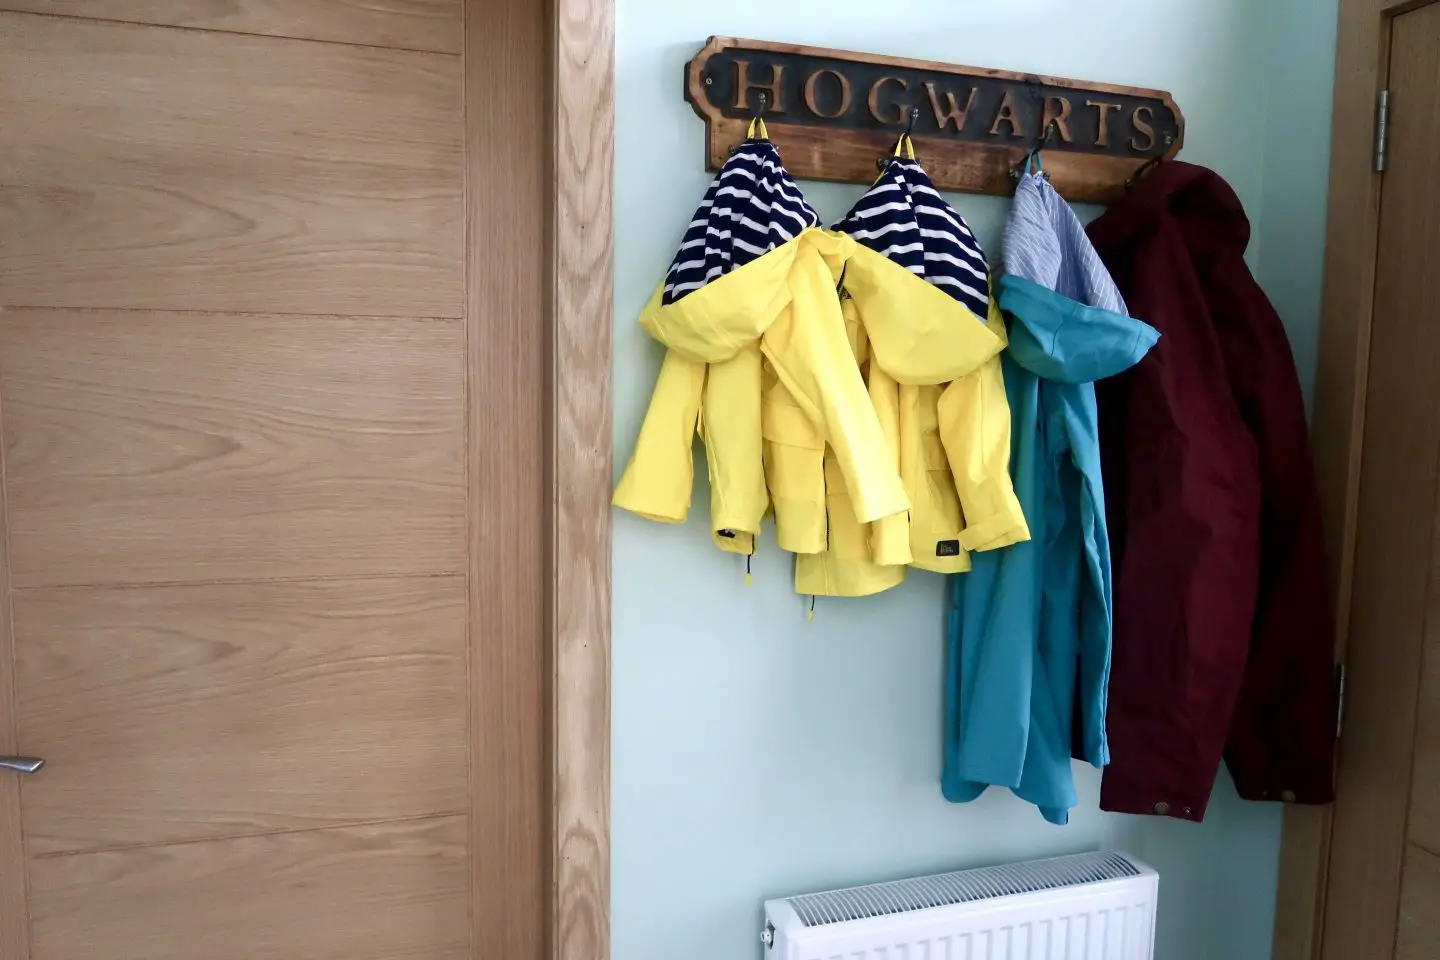 A hallway with oak doors and light green walls. There is a wooden coat hook with "Hogwarts" written on it and 4 cots hanging. There are 2 bright yellow coats with blue and white stripped hoods, one teal coat and one dark red coat.